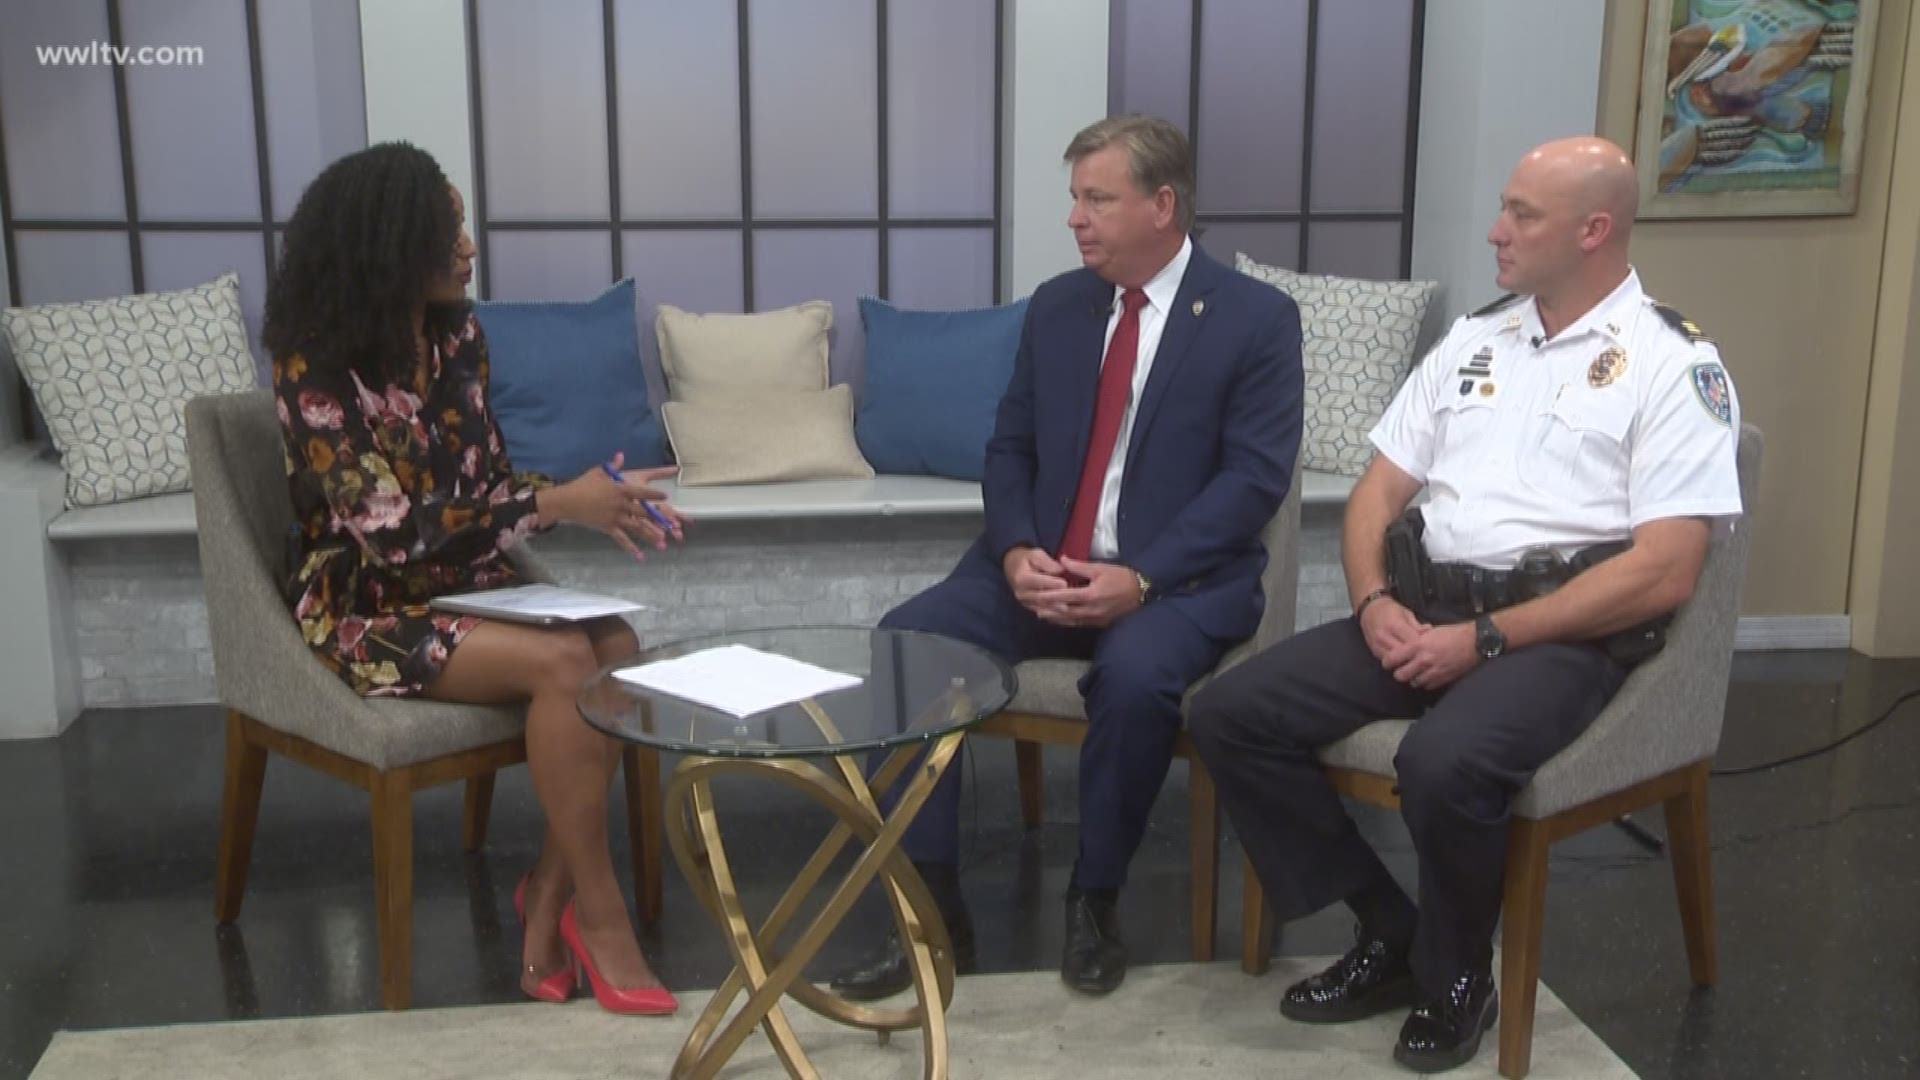 National Night Out Against Crime is October 16th, but Jefferson Parish officials are kicking things off early. Kenner Police Chief Michael Glaser is here with Public Affairs Captain Jason Rivarde from the Jefferson Parish Sheriff's Office with a prievew o